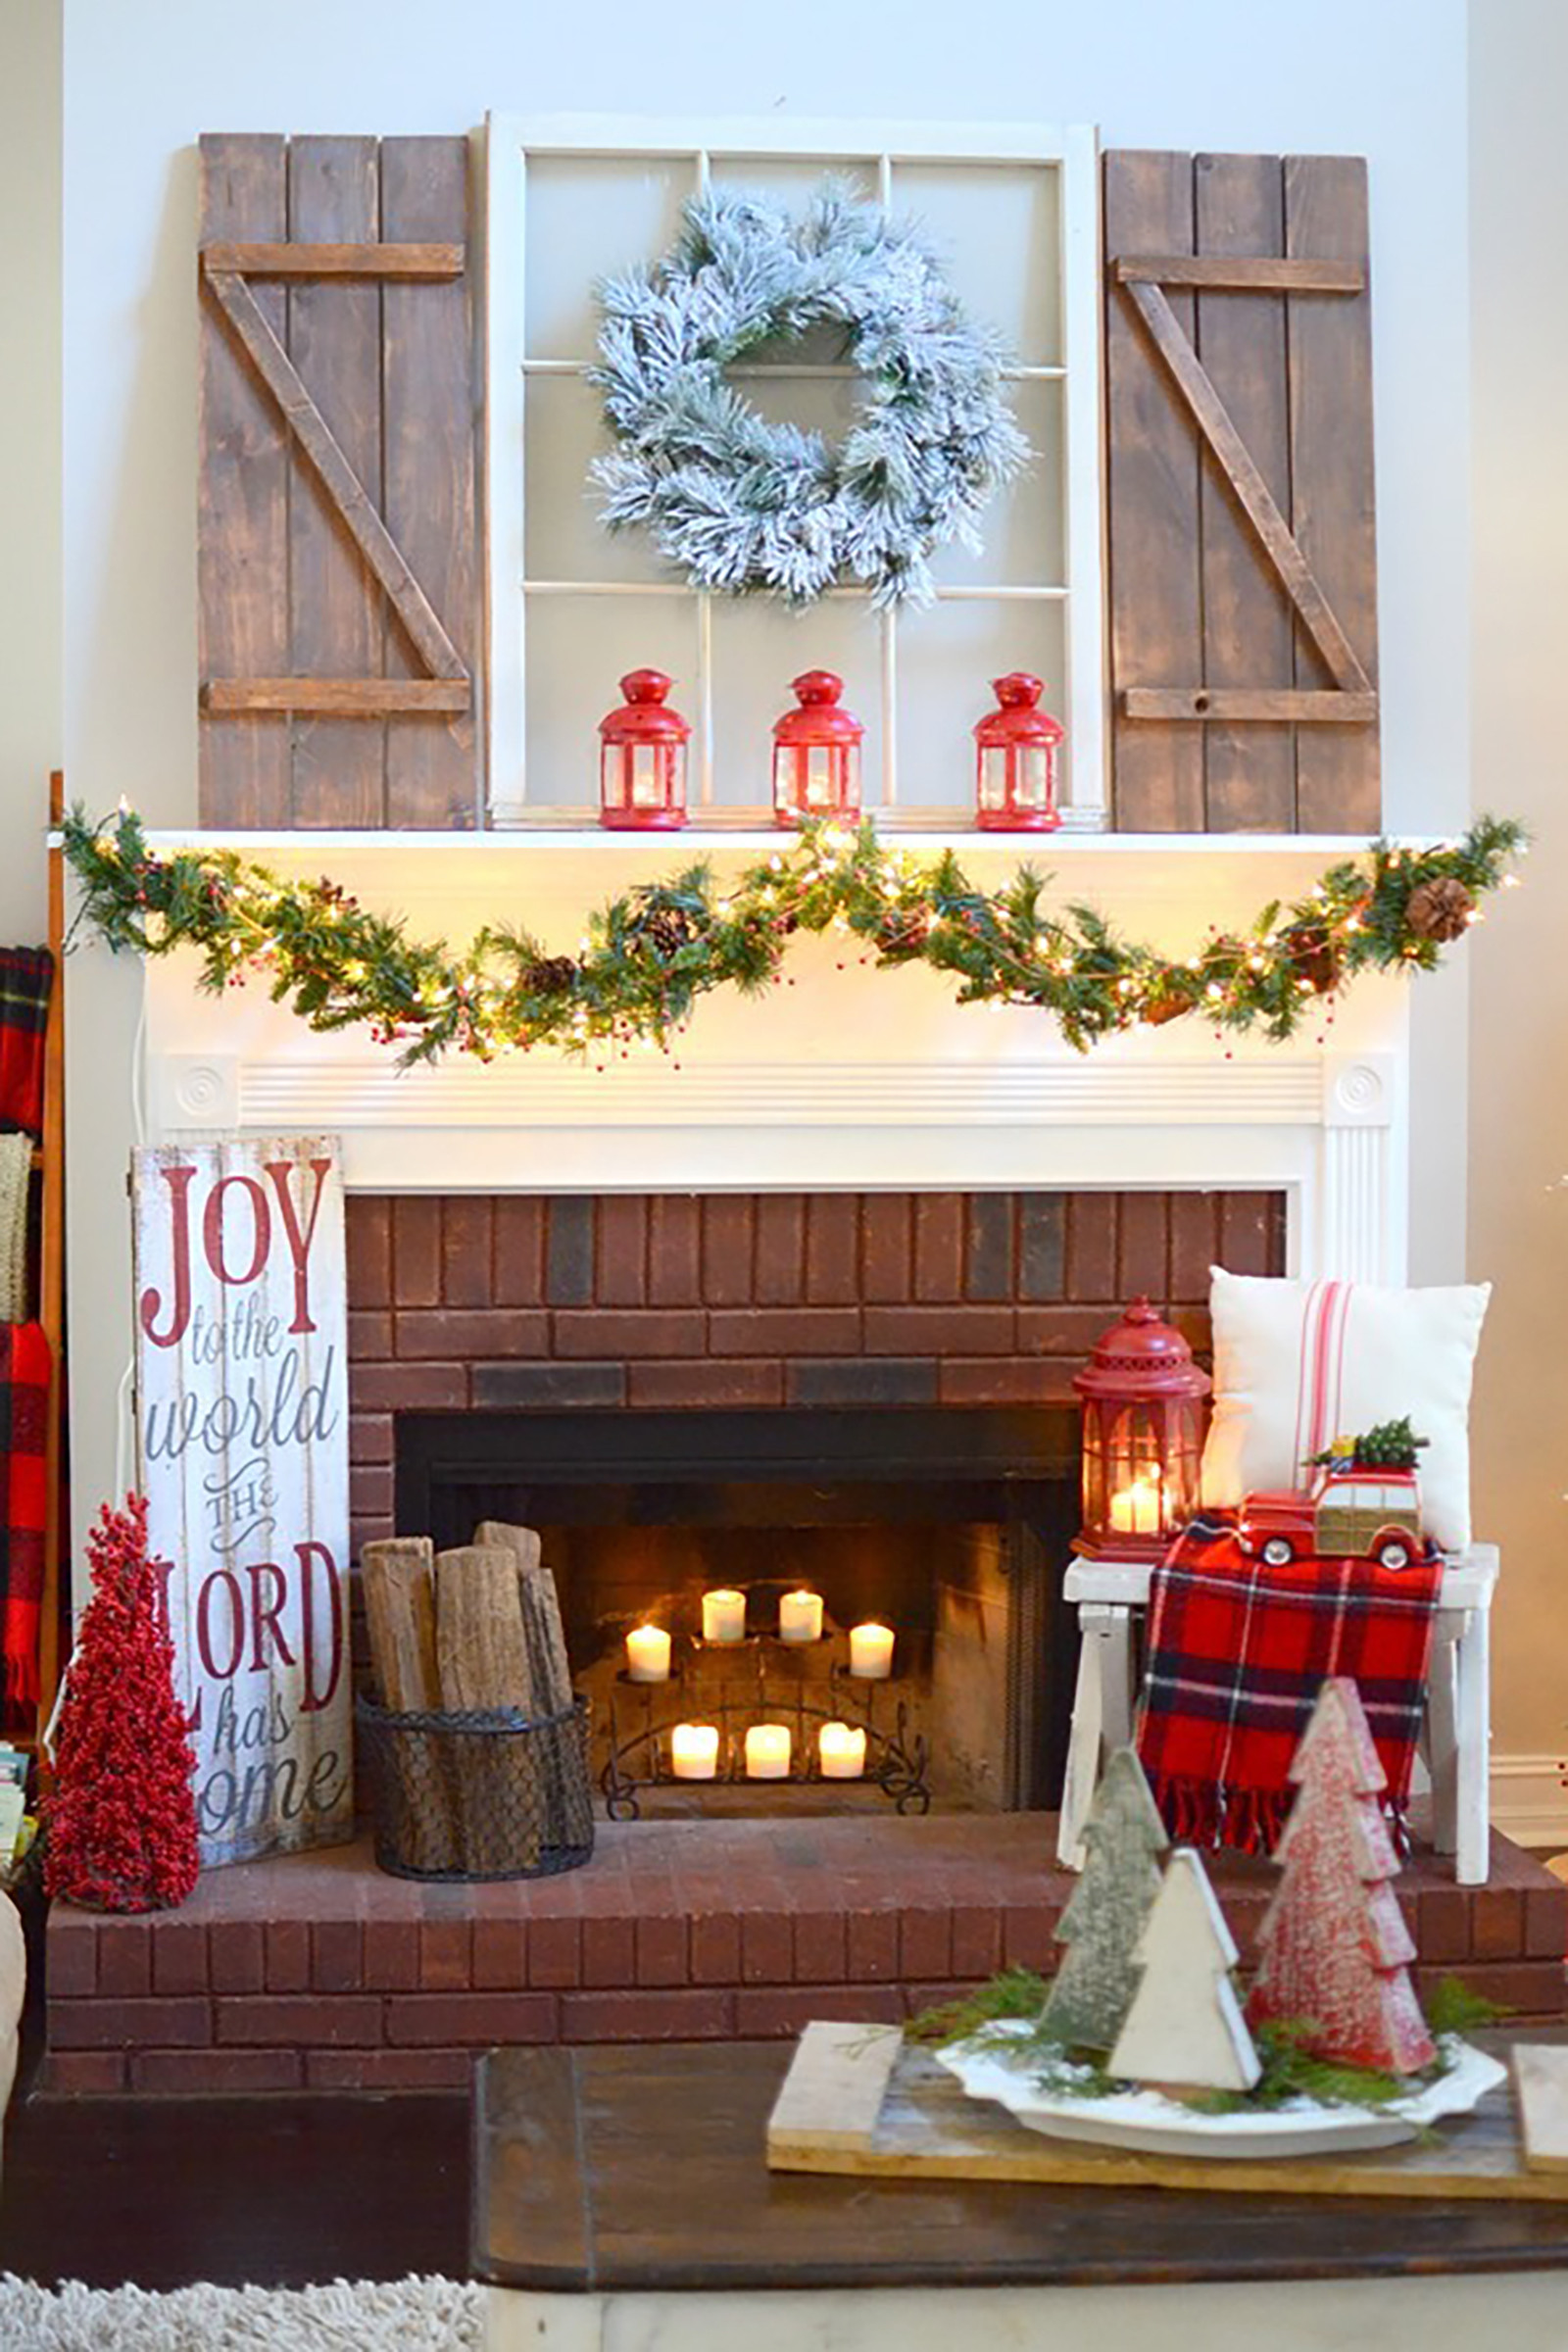 Fireplace Mantel Decorations For Christmas
 35 Christmas Mantel Decorations Ideas for Holiday